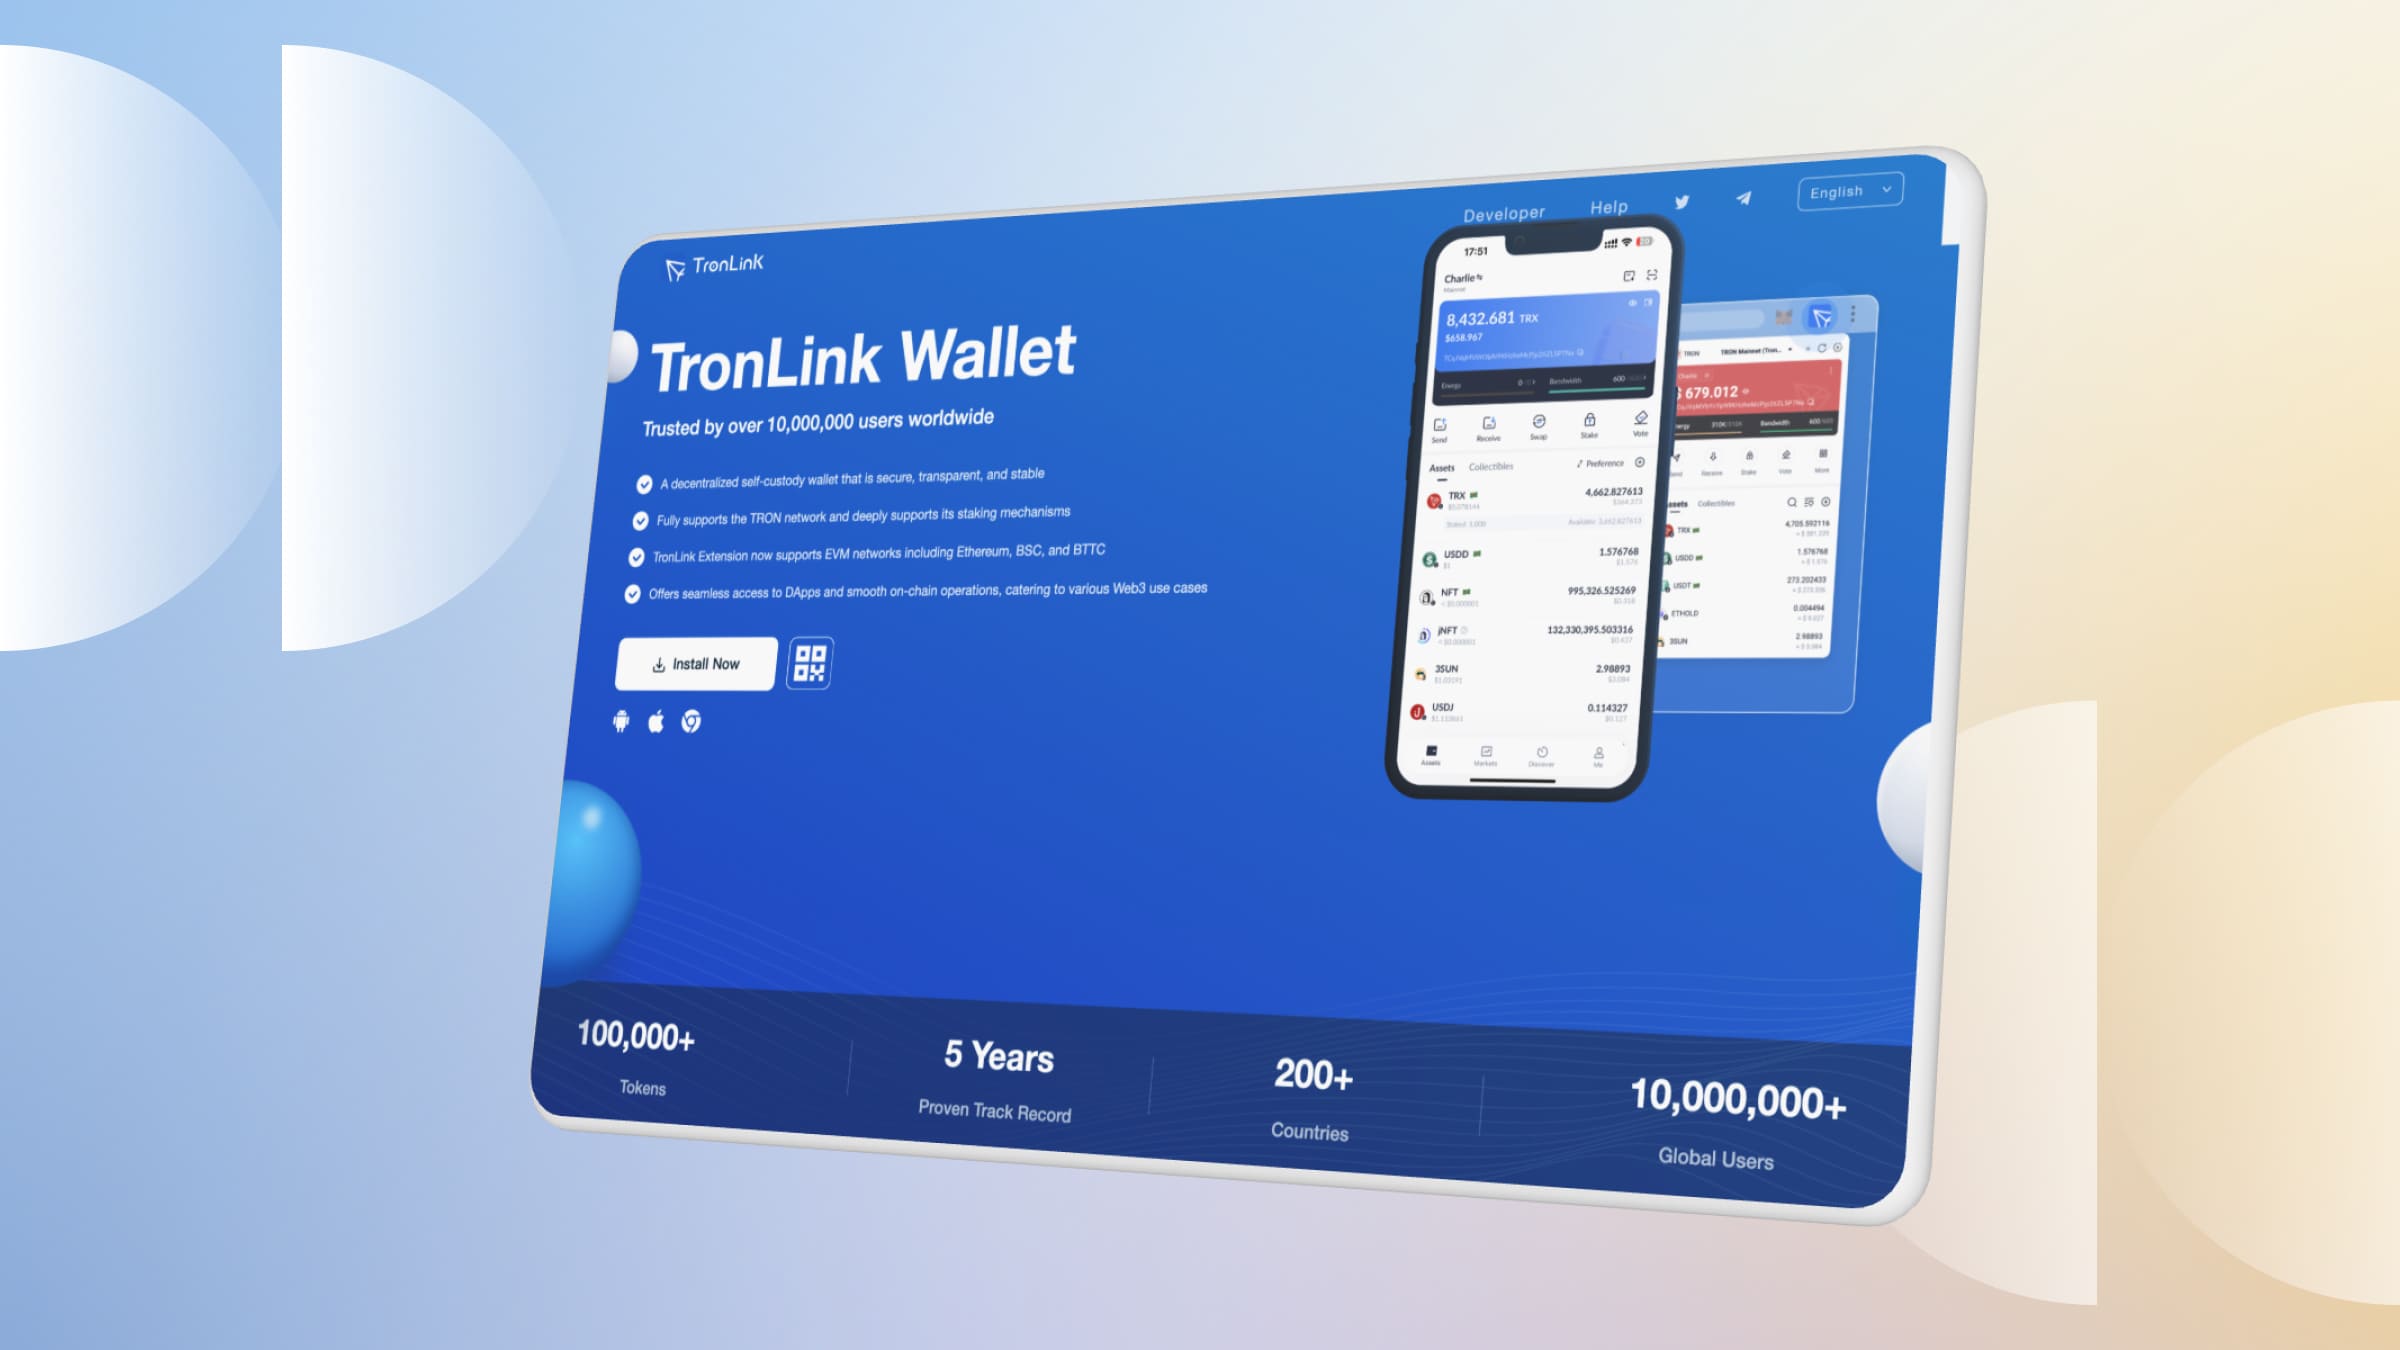 TronLink is available as an extension, desktop and mobile app.